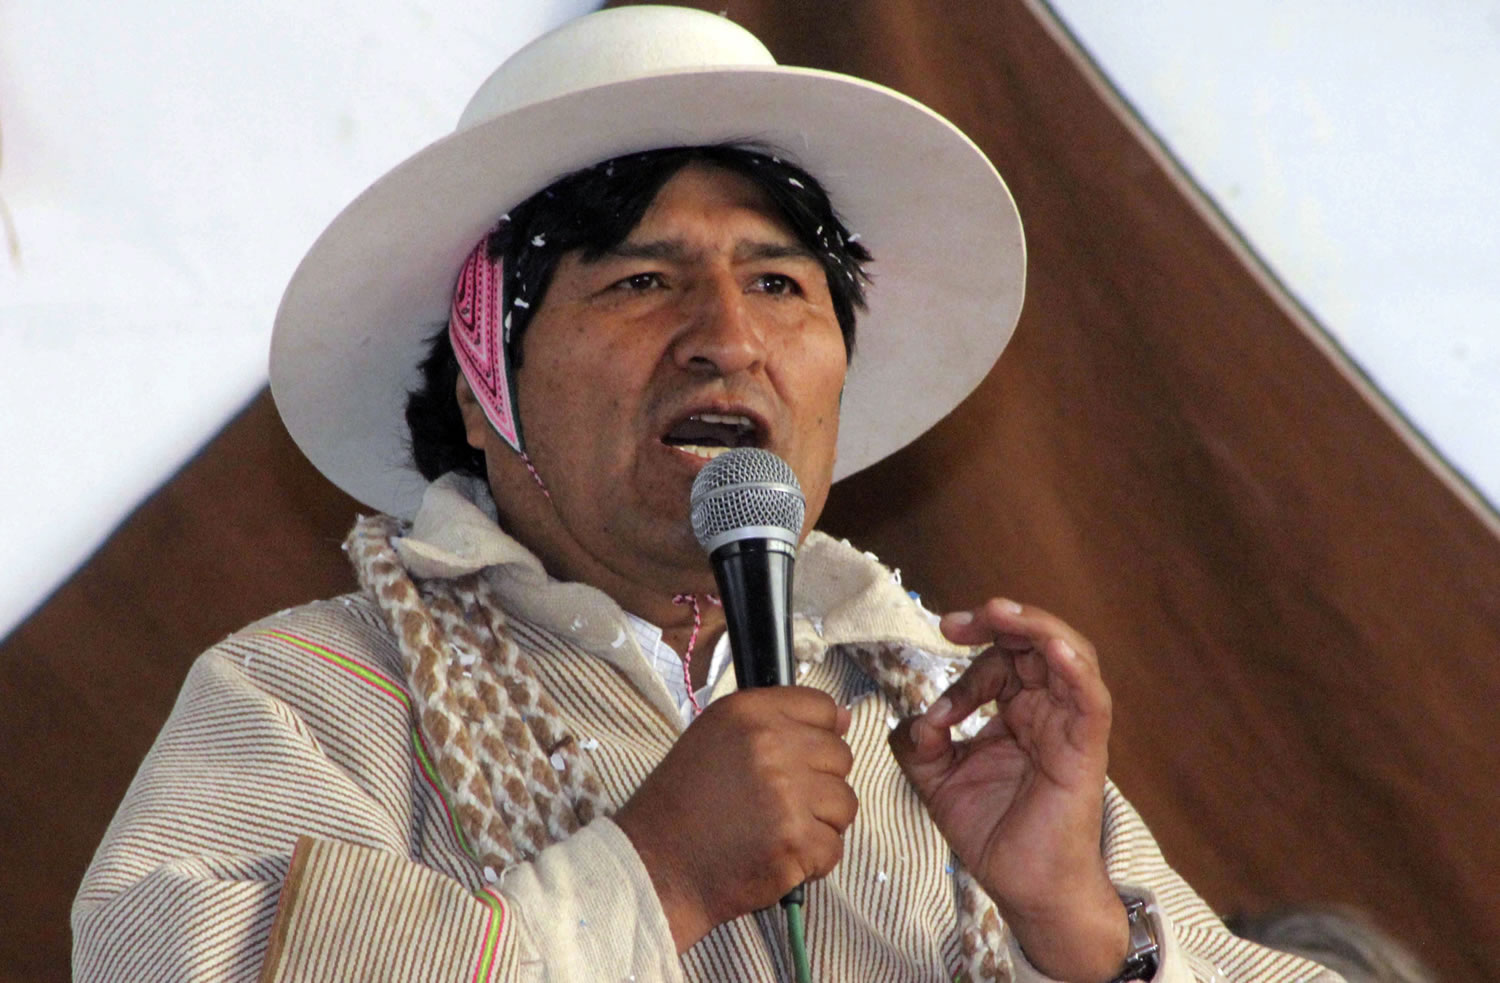 Bolivia's President Evo Morales speaks during a meeting with Uru-Chipaya indigenous in Chipaya, Bolivia, where Morales announced NSA leaker Edward Snowden is welcome in Bolivia.